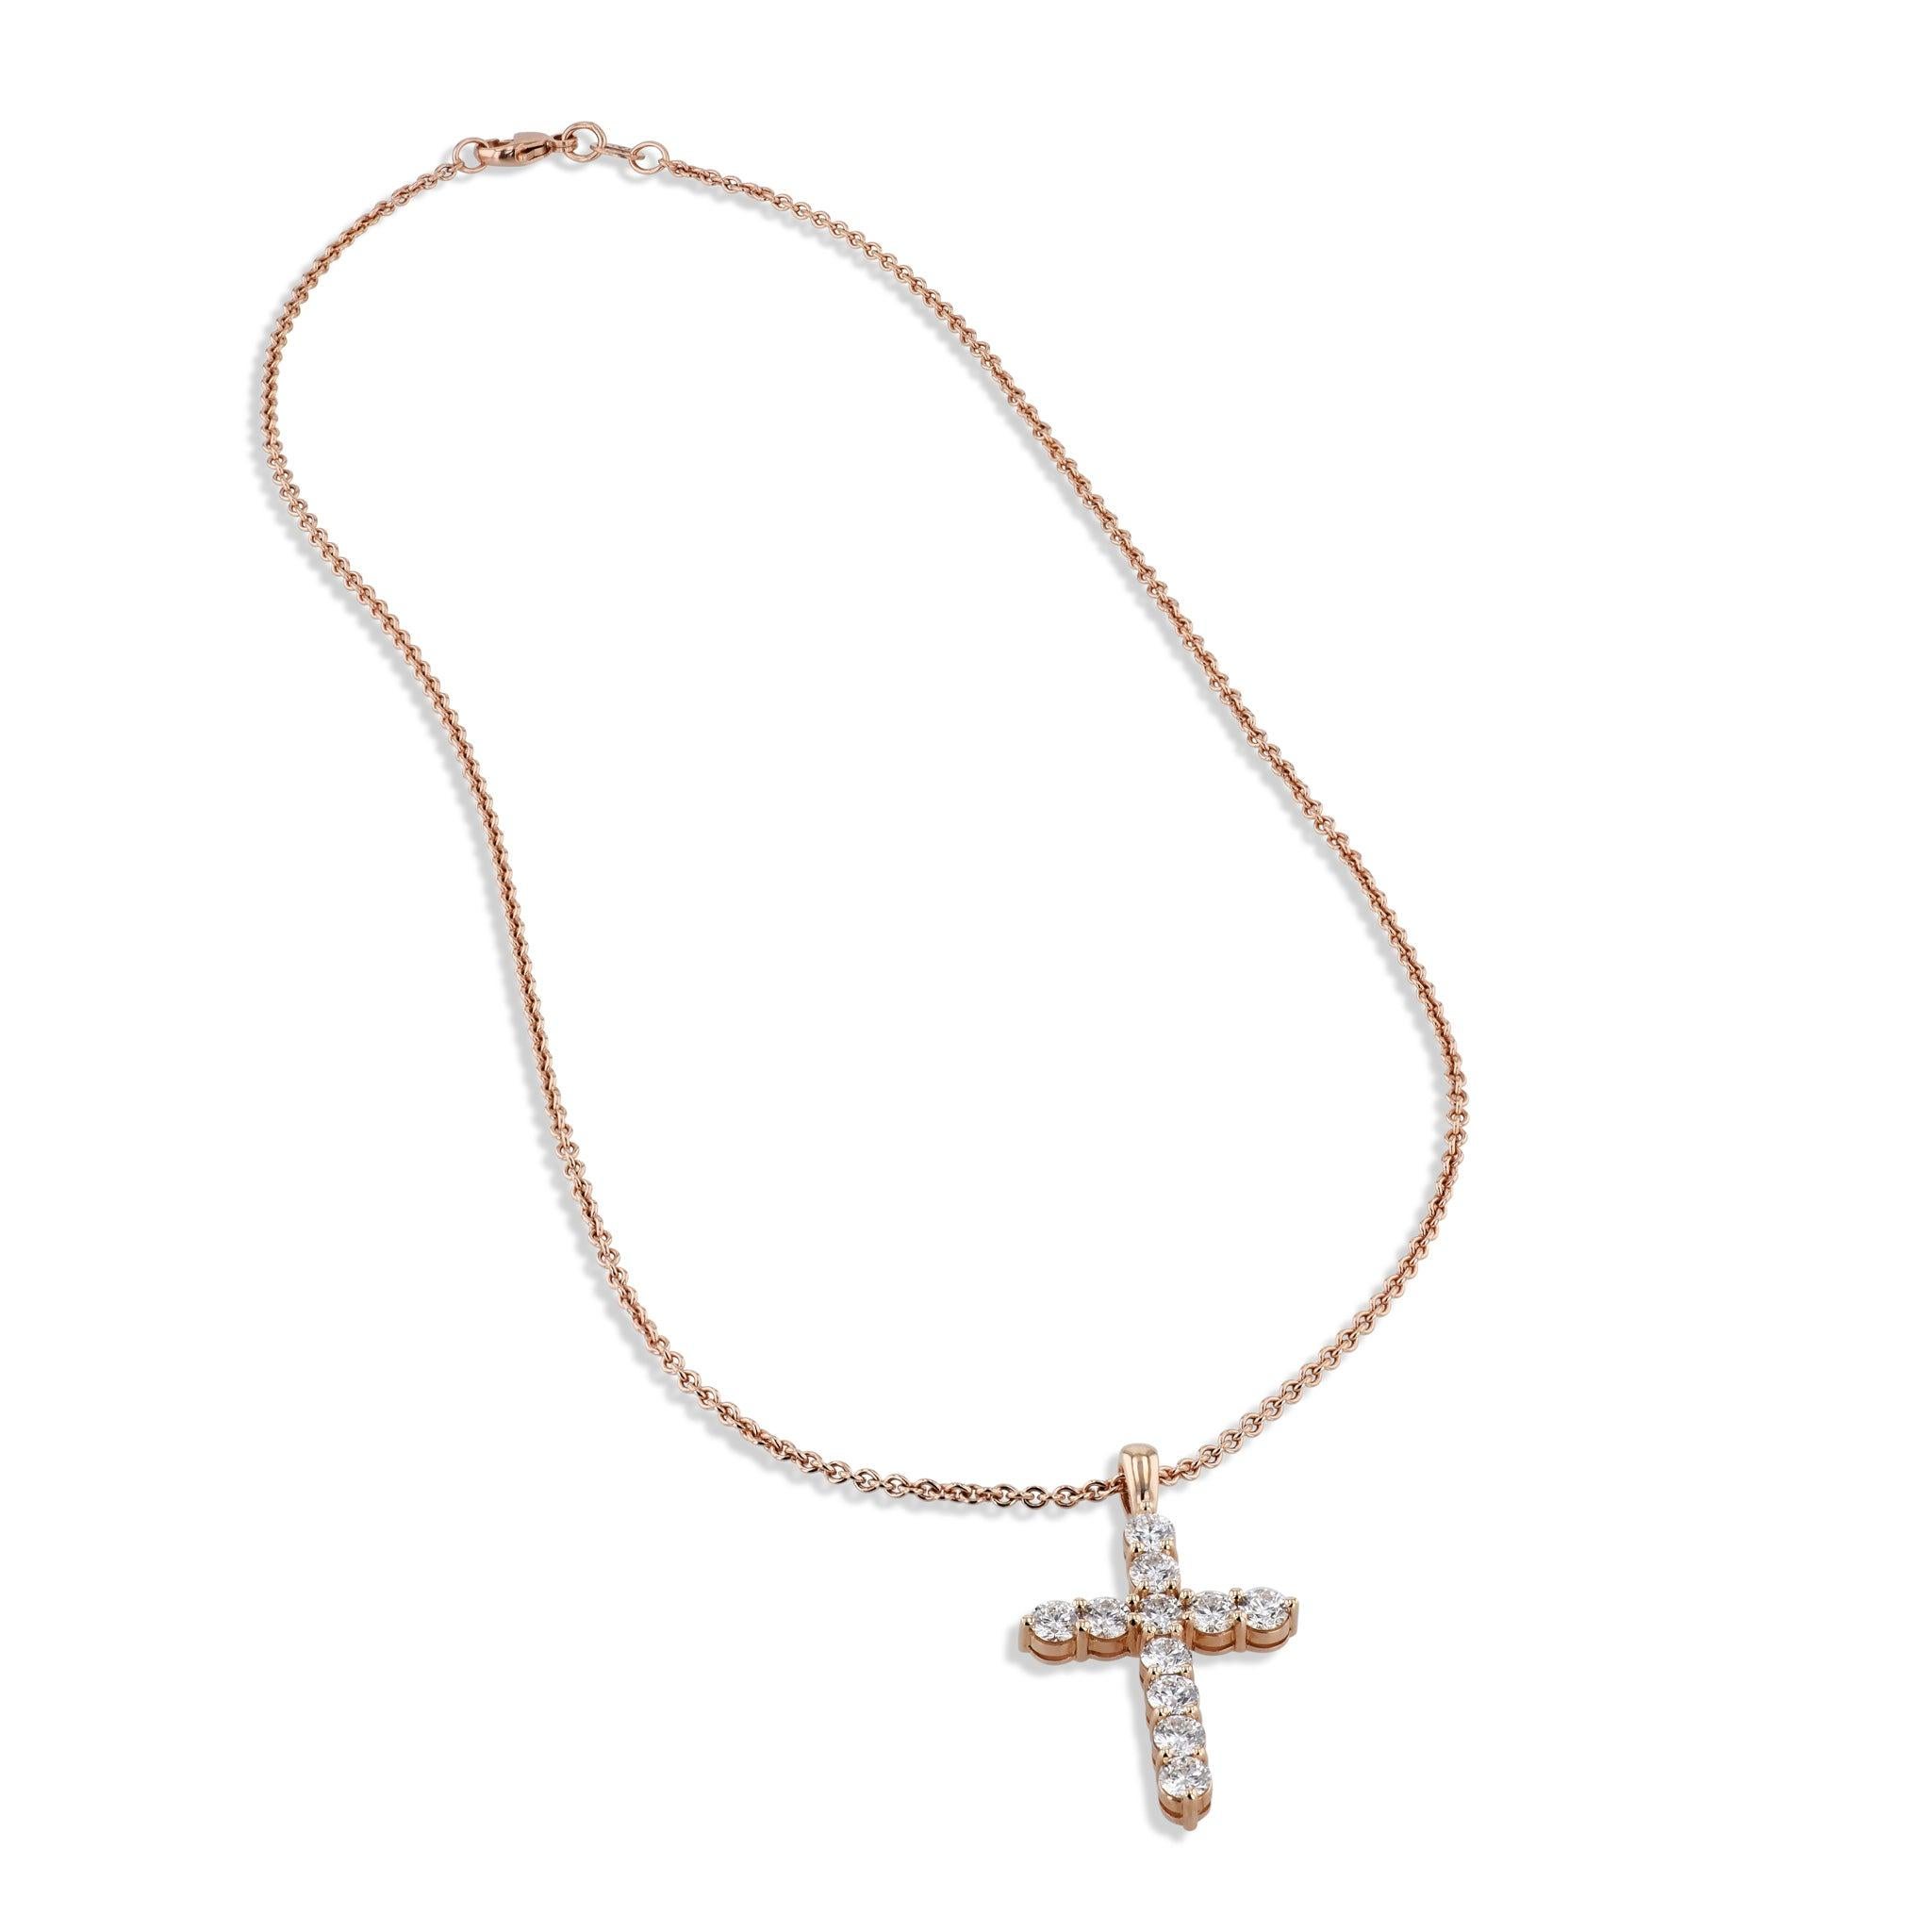 Admire the beauty of this Rose Gold Diamond Cross Pendant! Crafted in 18kt rose gold, it's adorned with diamonds for a mesmerizing sparkle. A testimony to pure luxury - buy it now and complete your look!
Rose Gold Diamond Cross Pendant
18kt. Rose